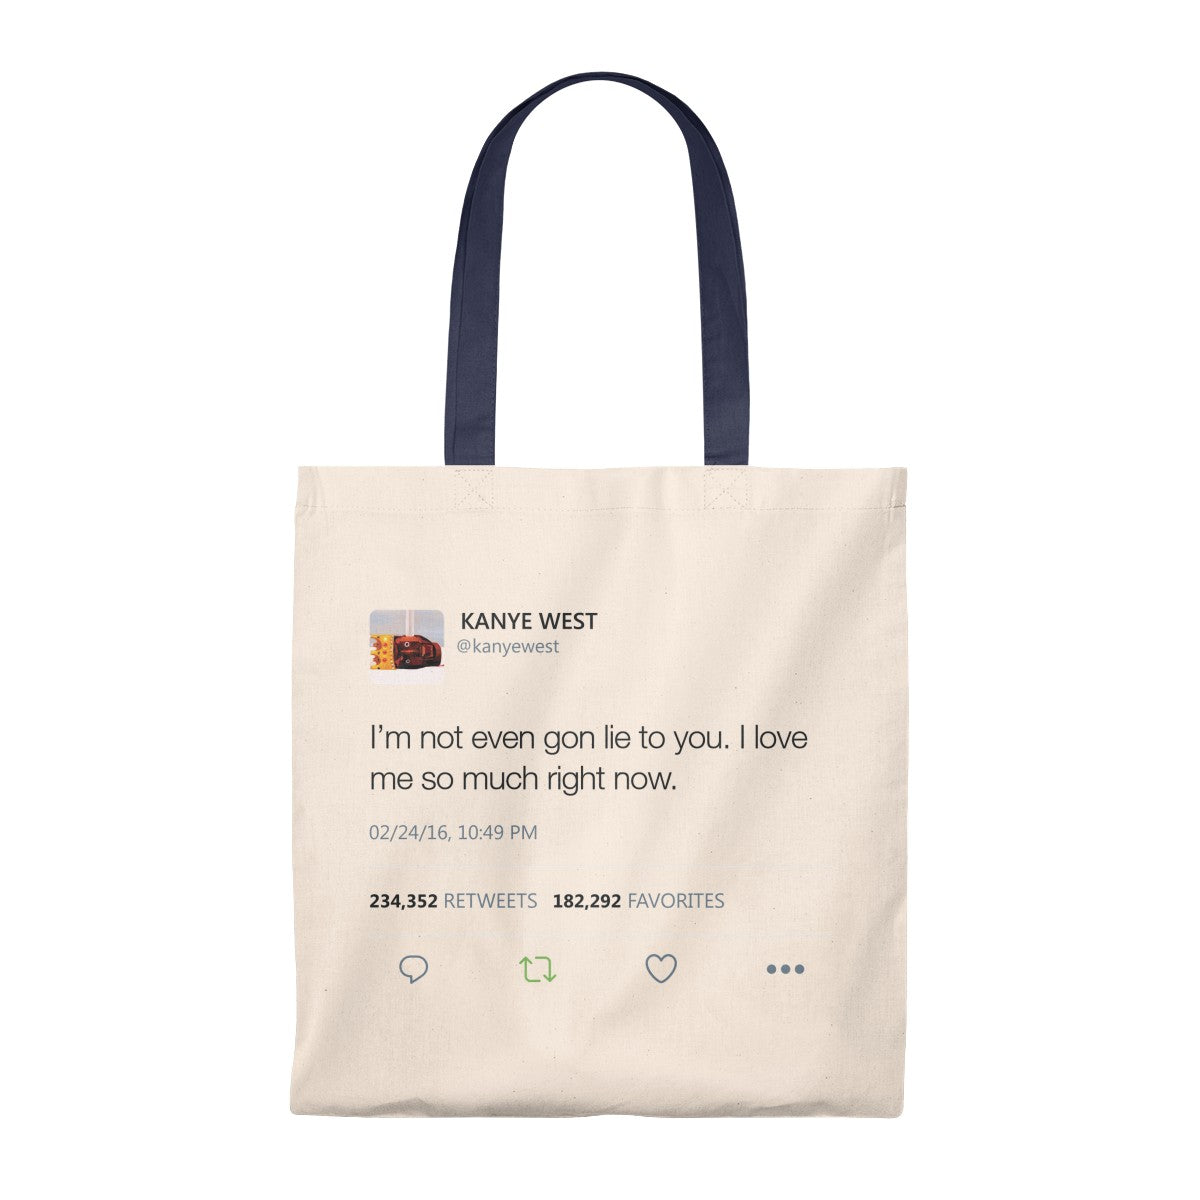 I Love Me So Much Right Now Kanye West Tweet Tote Bag-Natural/Navy-Archethype